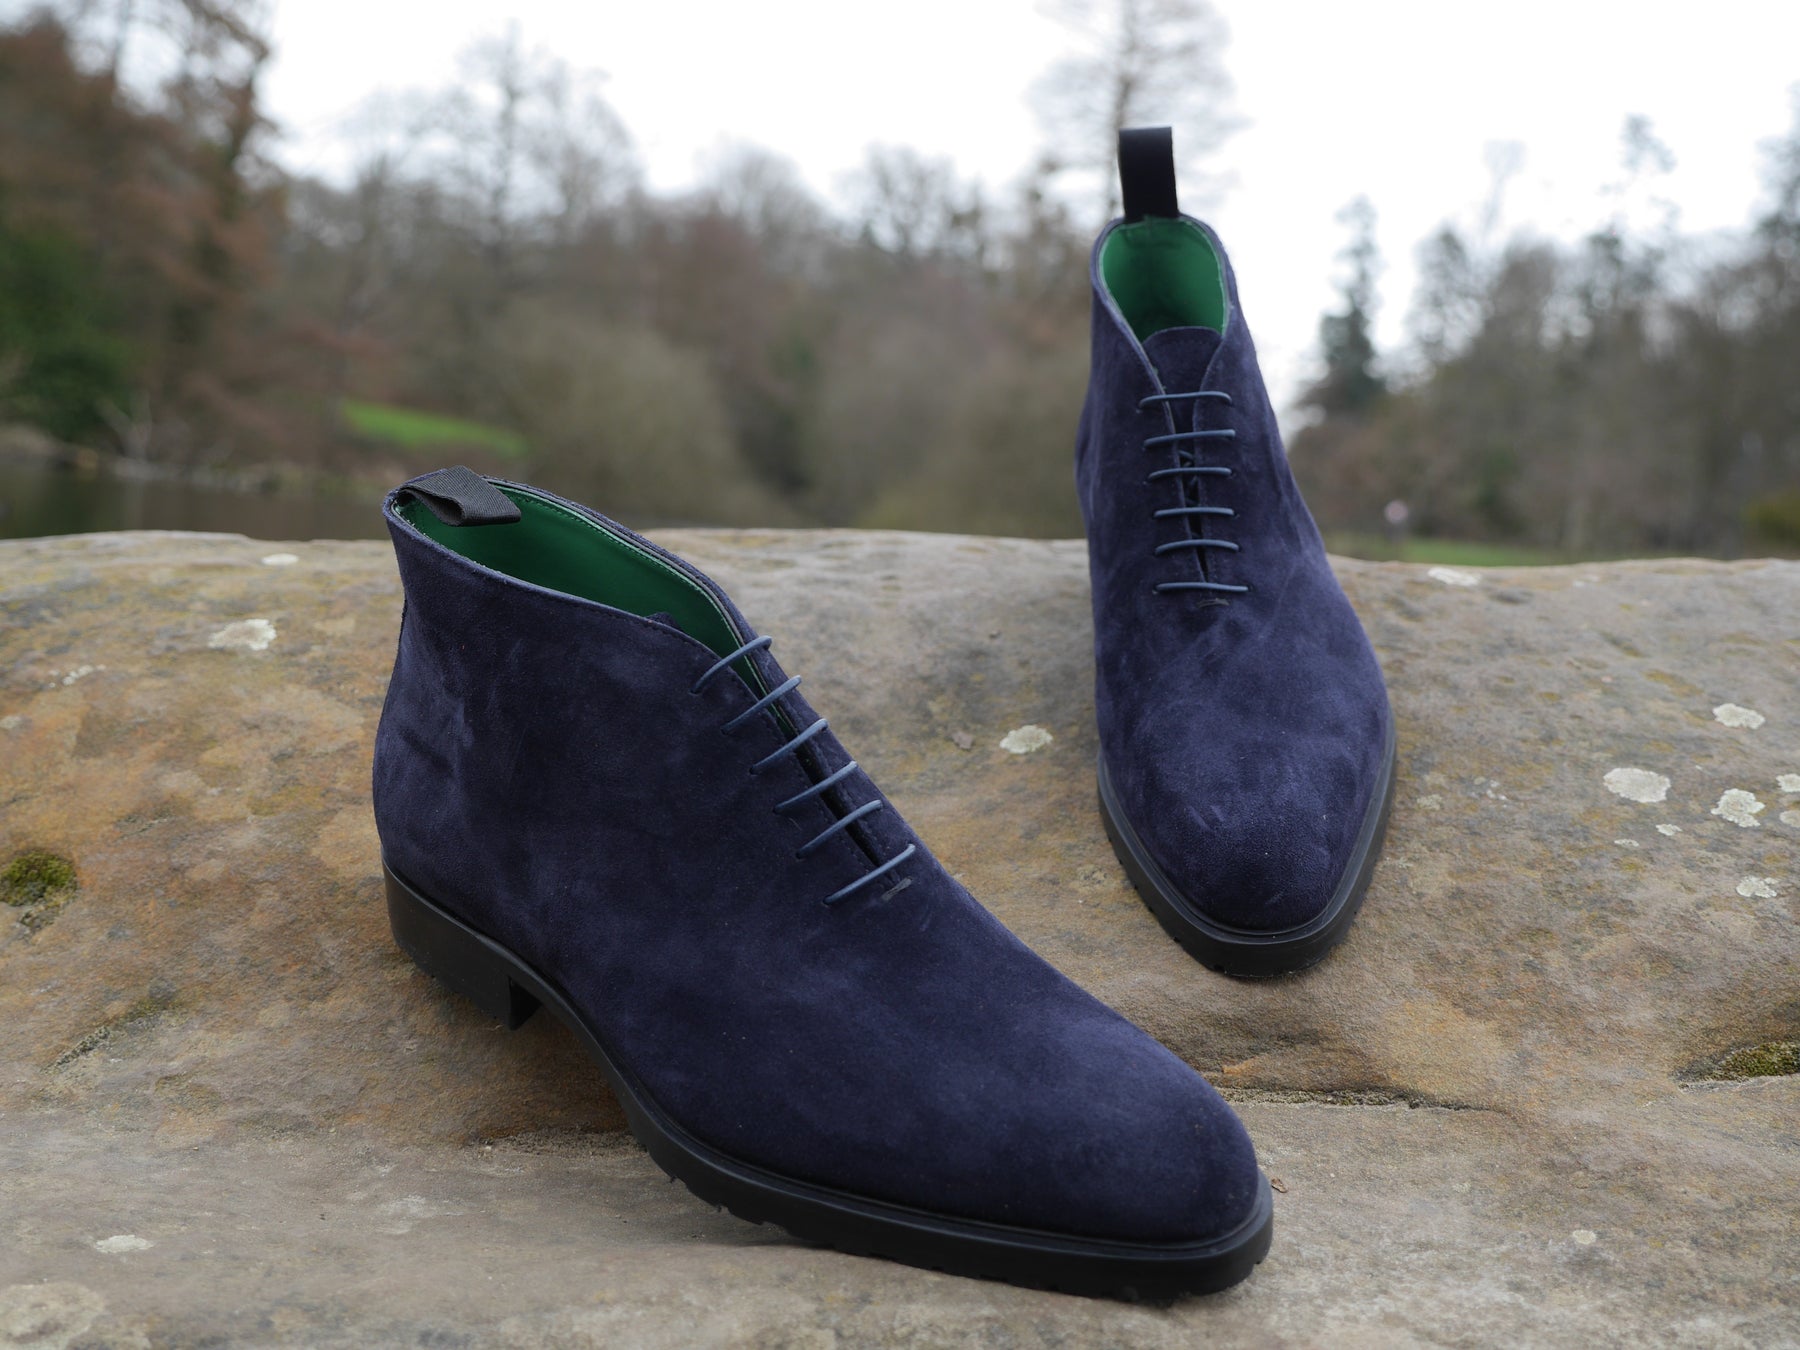 T698 - Chukka Boot Blue Suede